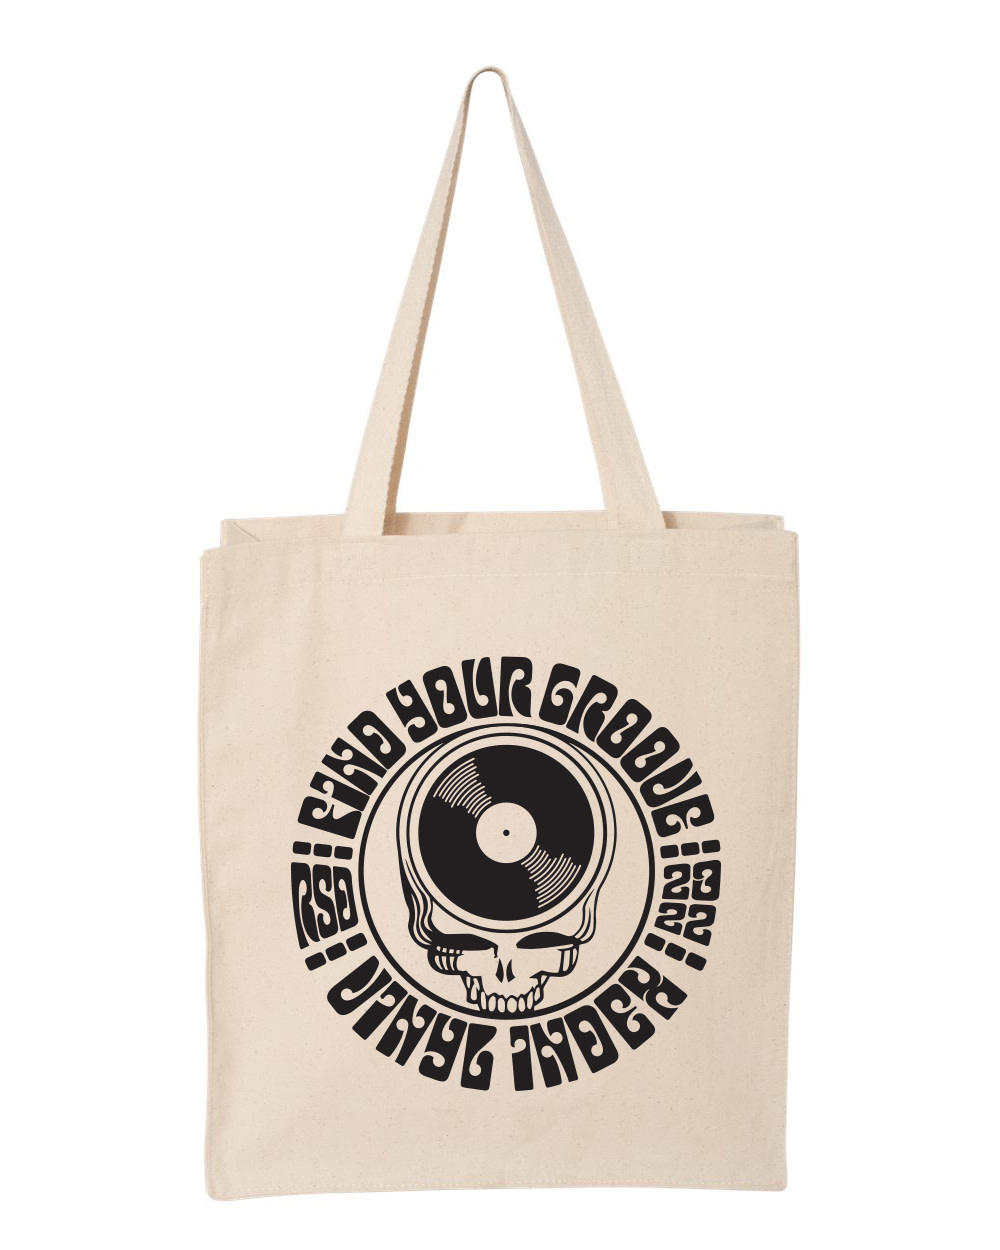 vinyl index. - RSD '22 (Find Your Groove) - Tote Bag